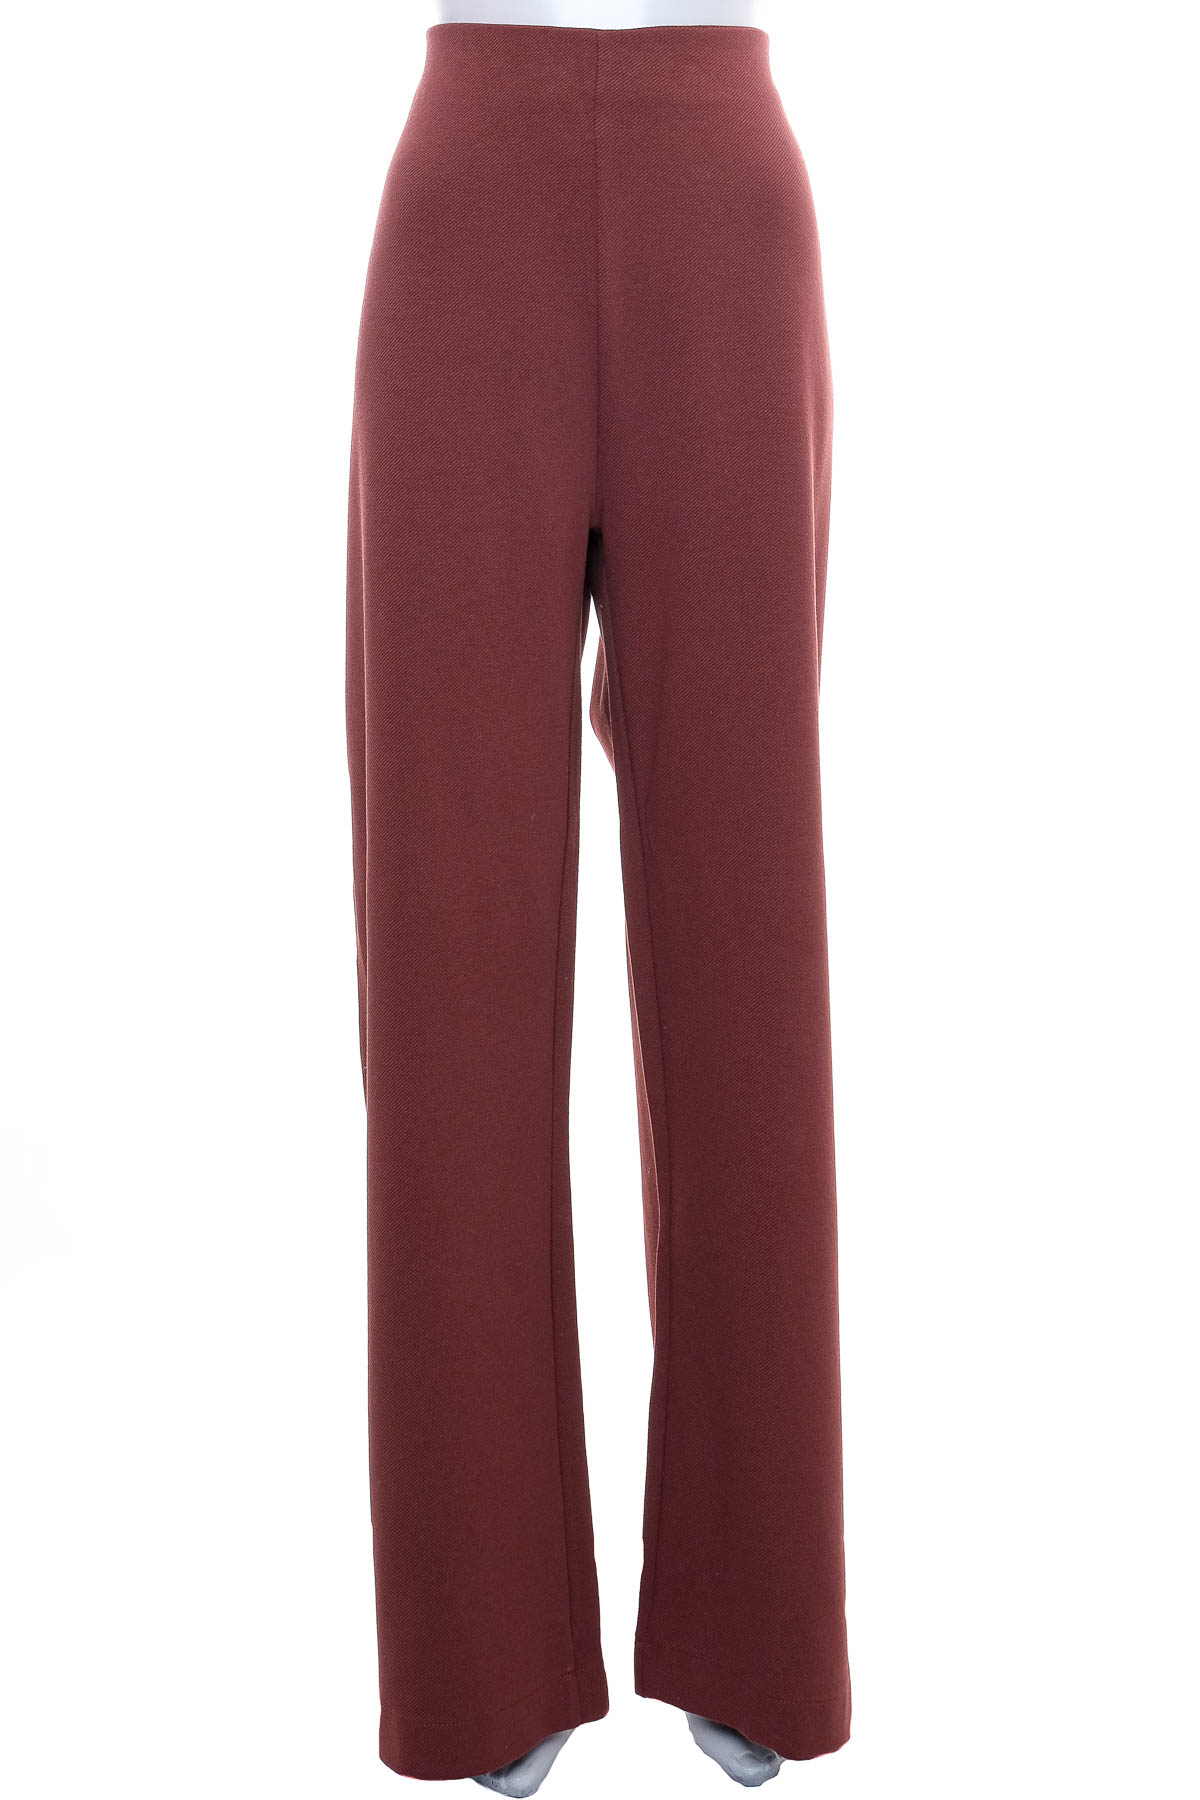 Women's trousers - Coco - 0